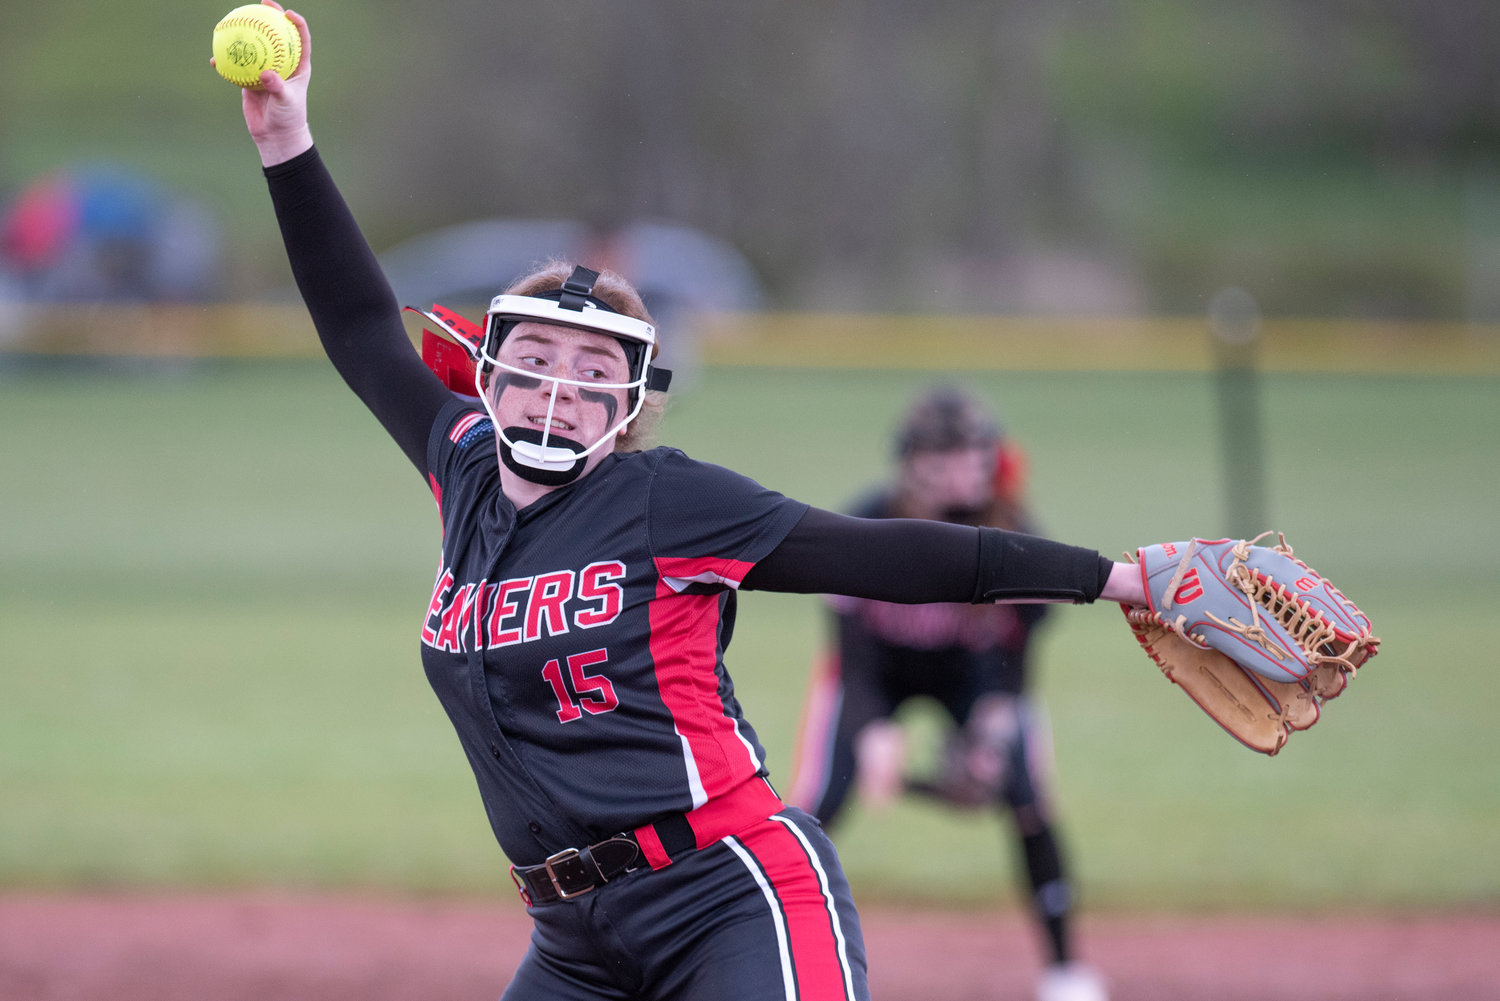 Tenino pitcher Emily Baxter winds up to deliver a pitch to an Elma batter during a league home game on April 26.